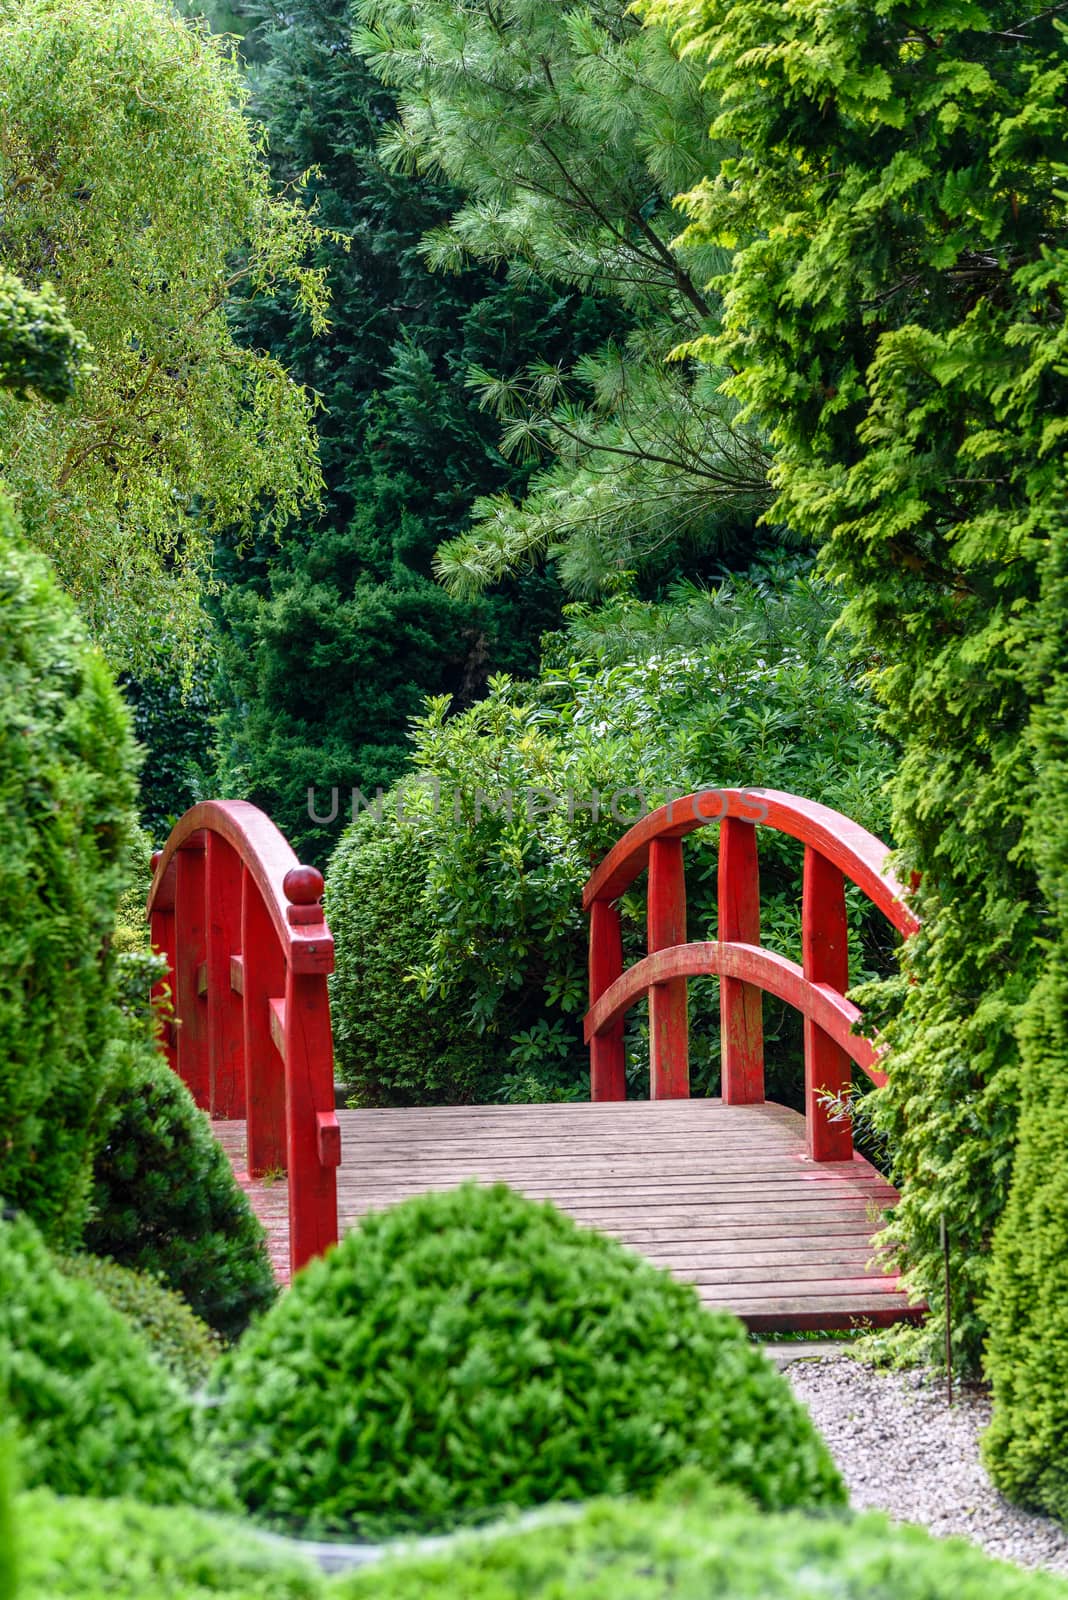 Beautiful Japanese garden with red wooden bridge among green trees